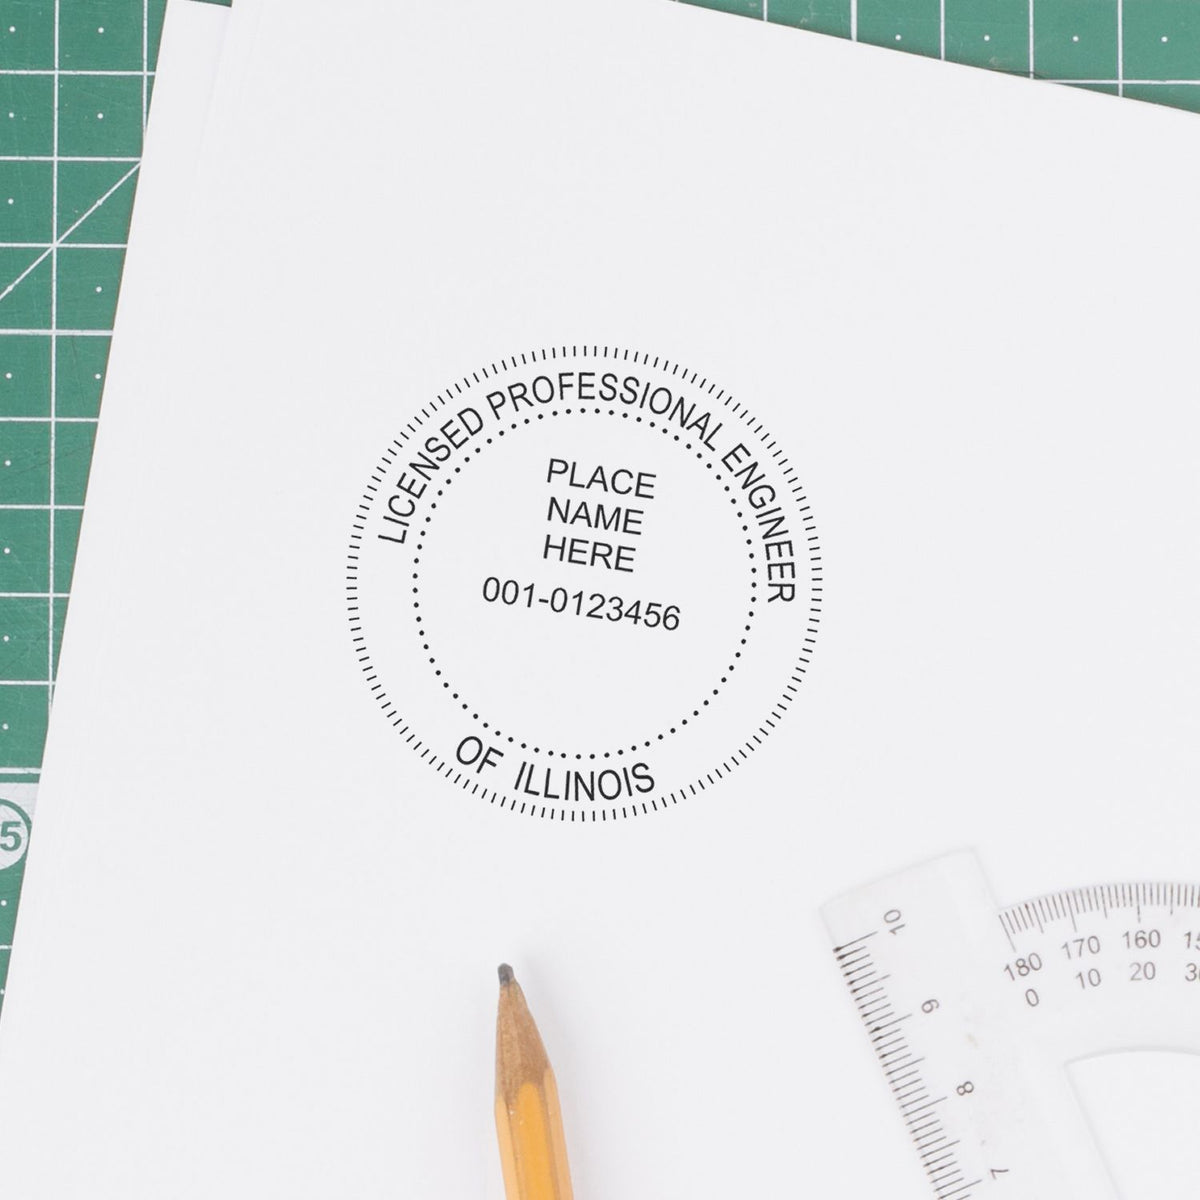 Another Example of a stamped impression of the Digital Illinois PE Stamp and Electronic Seal for Illinois Engineer on a piece of office paper.